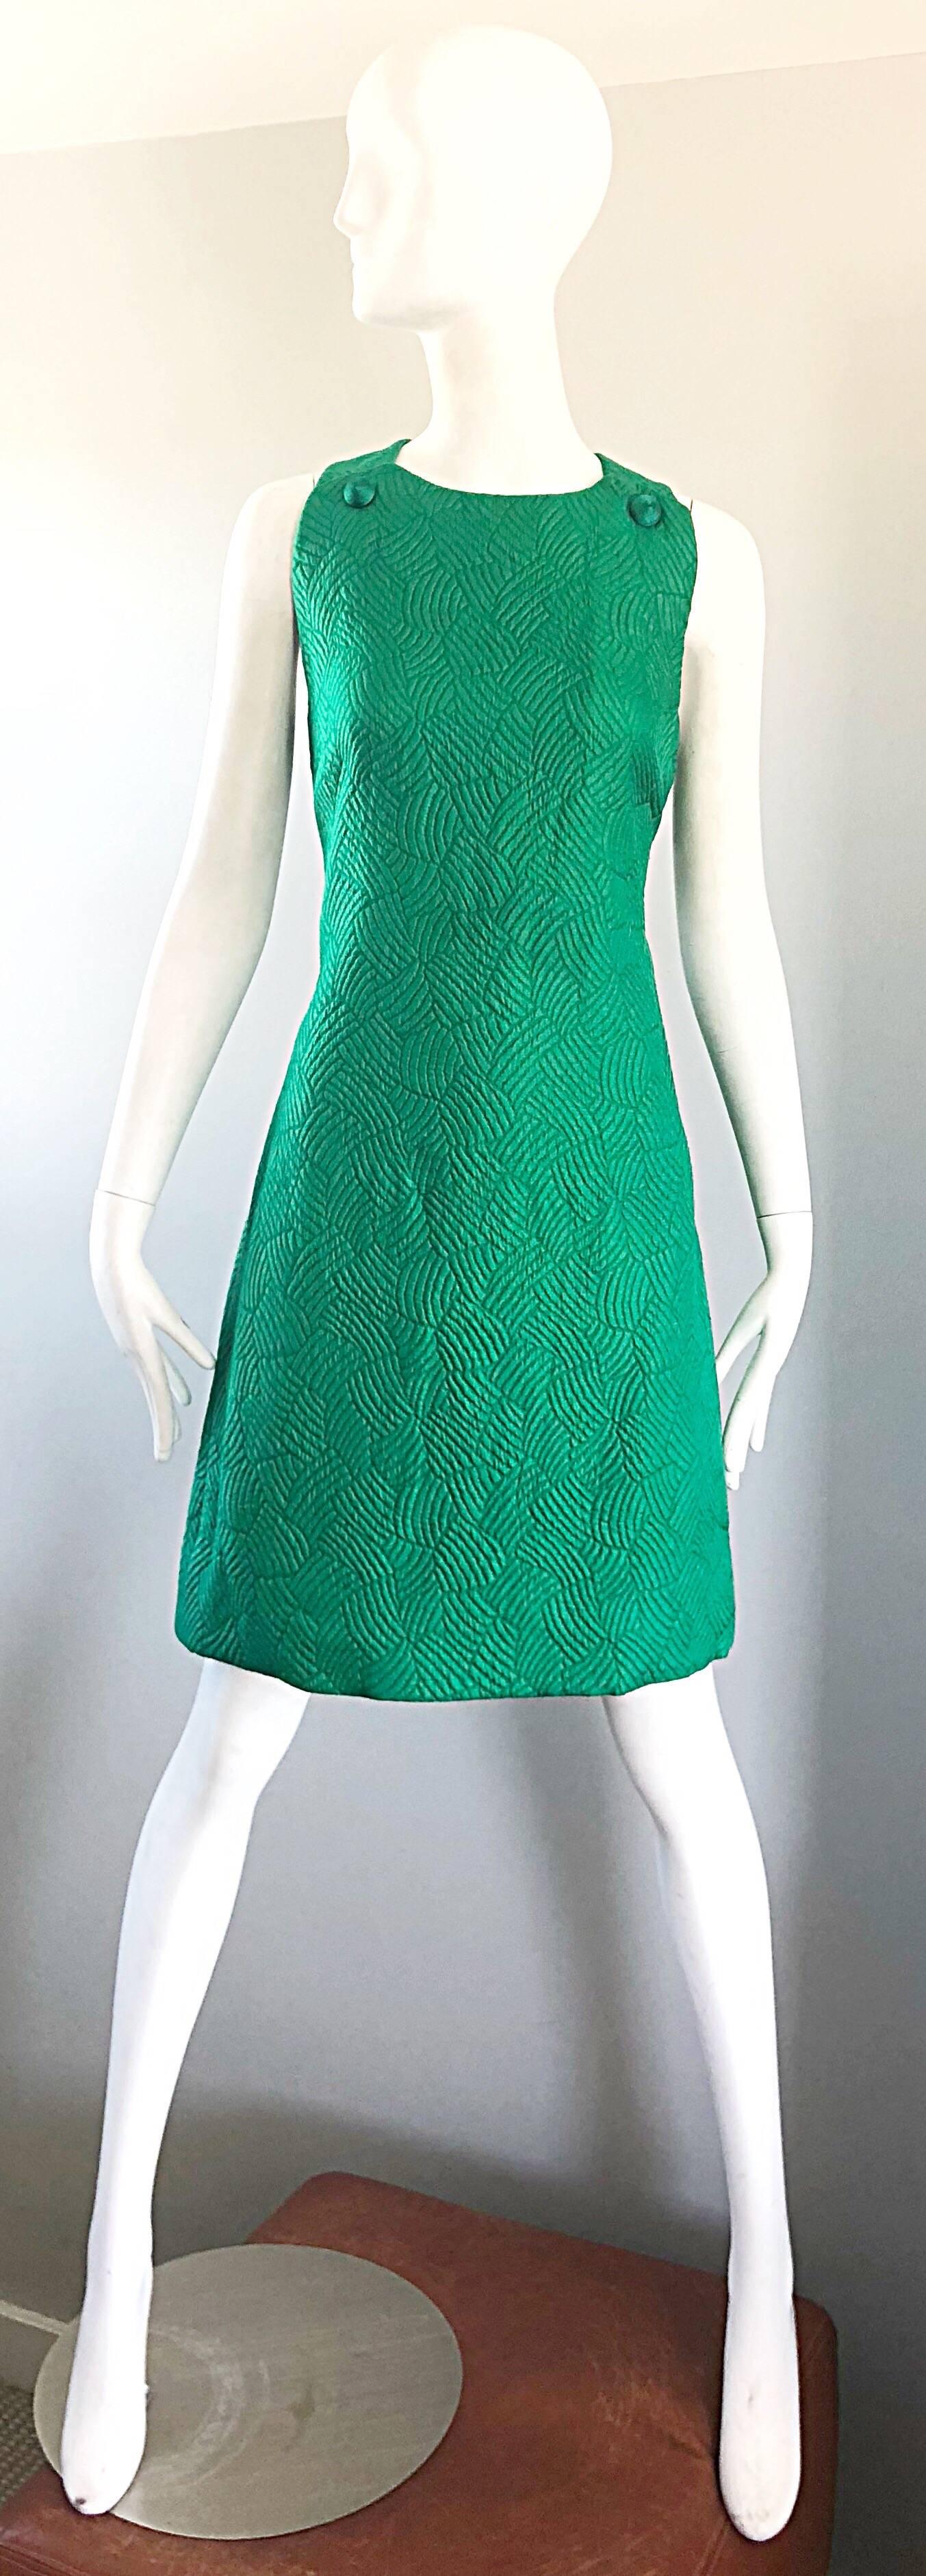 Beyond chic 1960s Kelly green quilted silk shift dress and matching cropped pillbox jacket ensemble! The perfect Kelly green color really set this rare set apart from others. The shift dress features a racerback that has hidden hook-and-eye closures